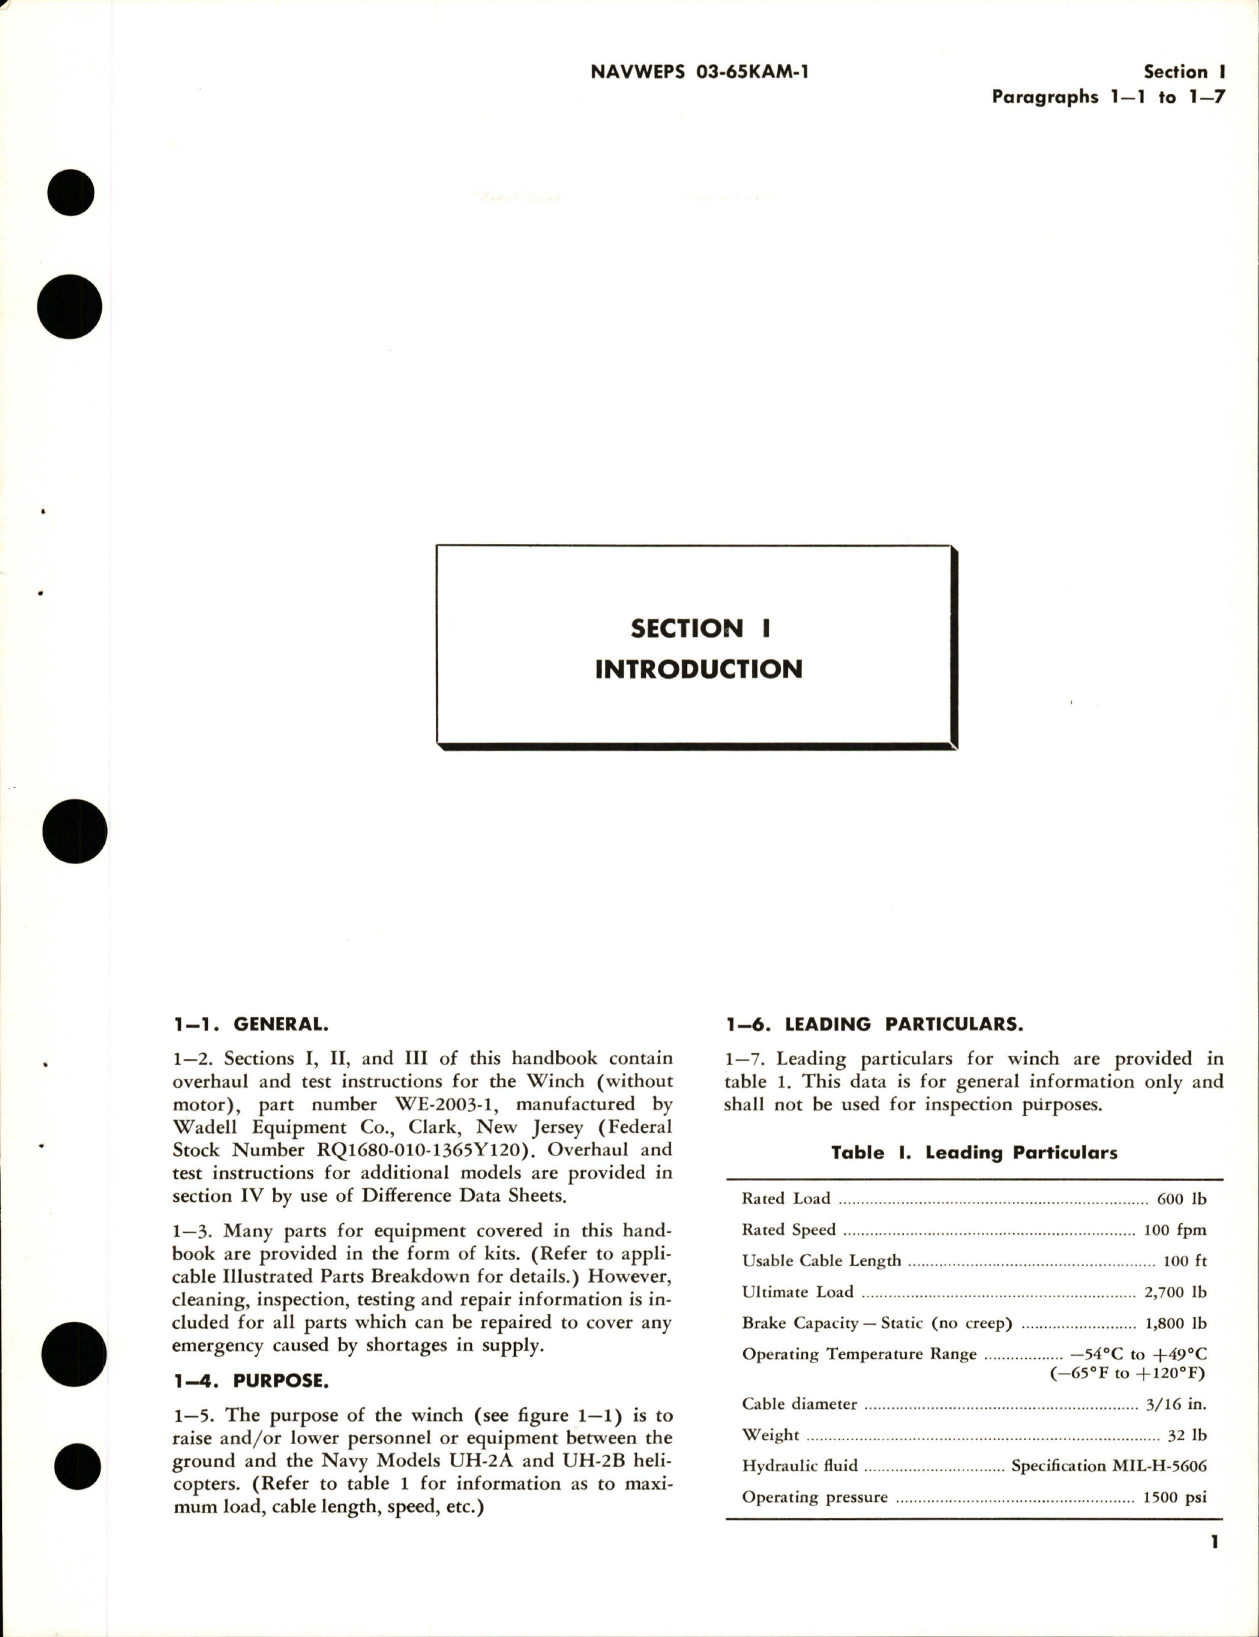 Sample page 5 from AirCorps Library document: Overhaul Instructions for Winch Without Motor - Parts WE-2003-1 and K682162-5